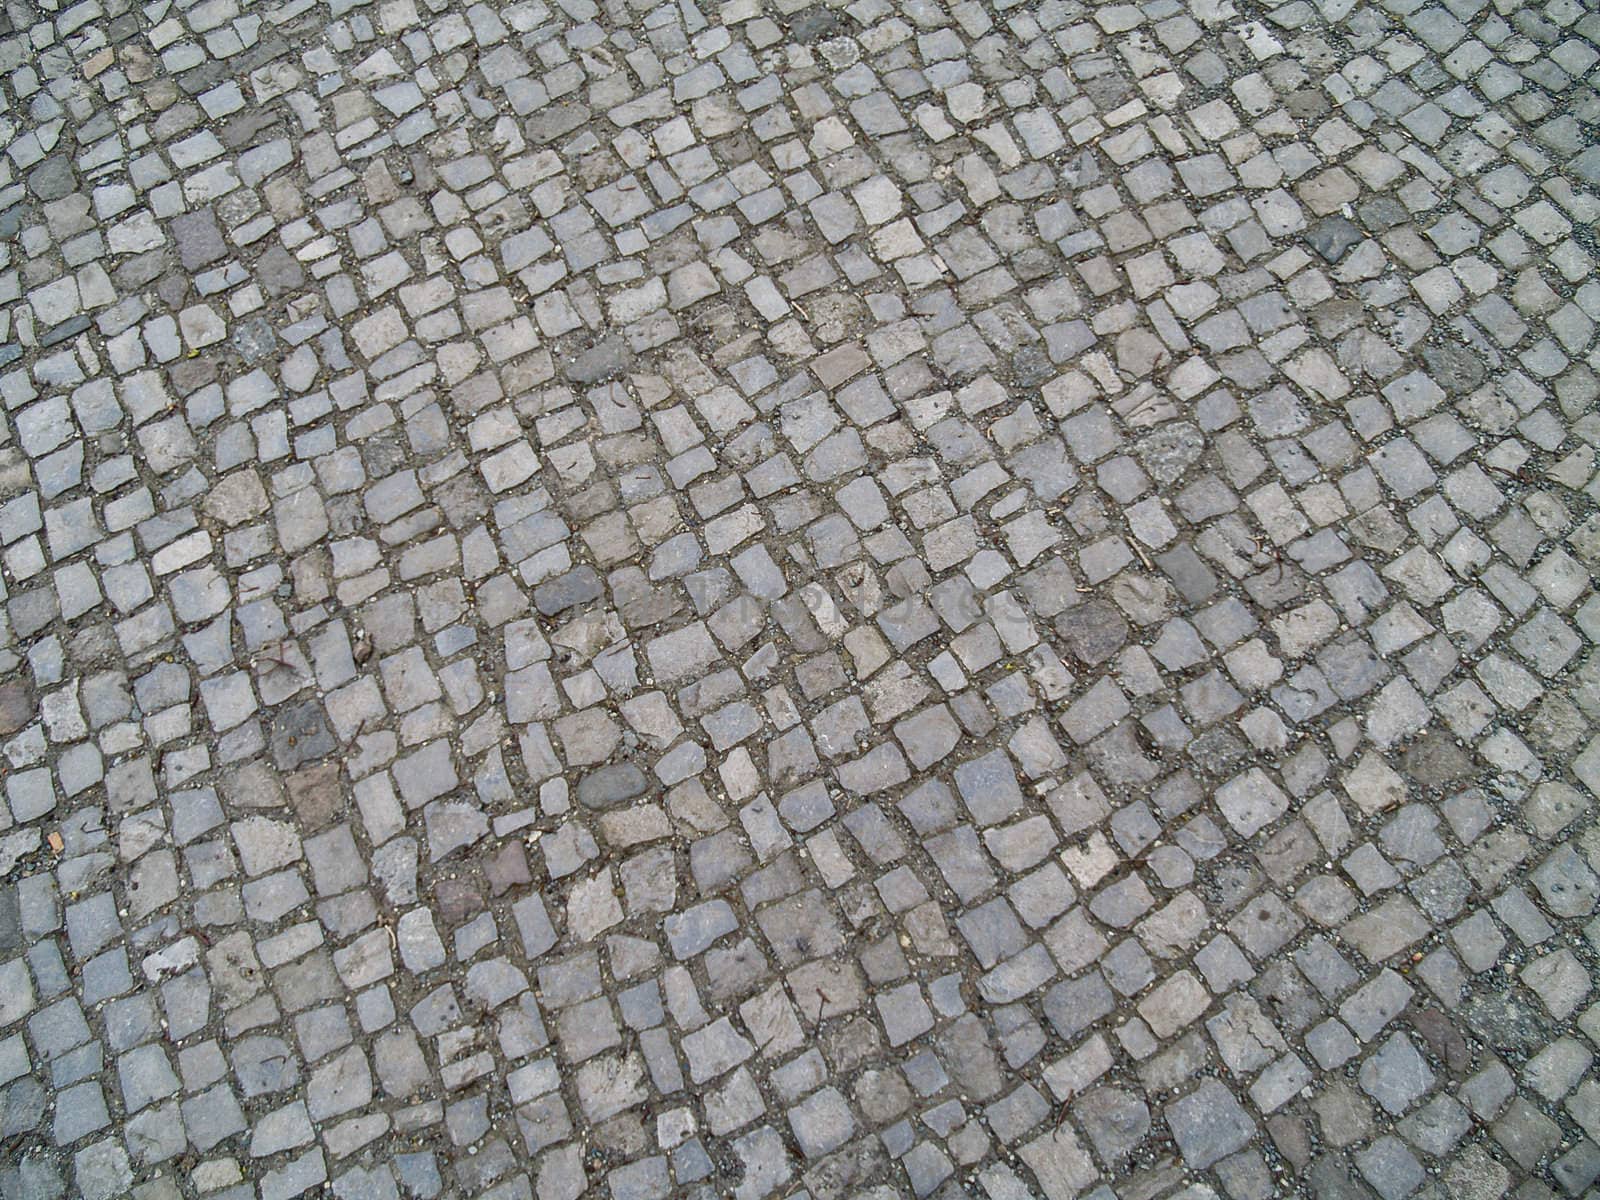 Paving stones from granite which can be used as texture or as a background